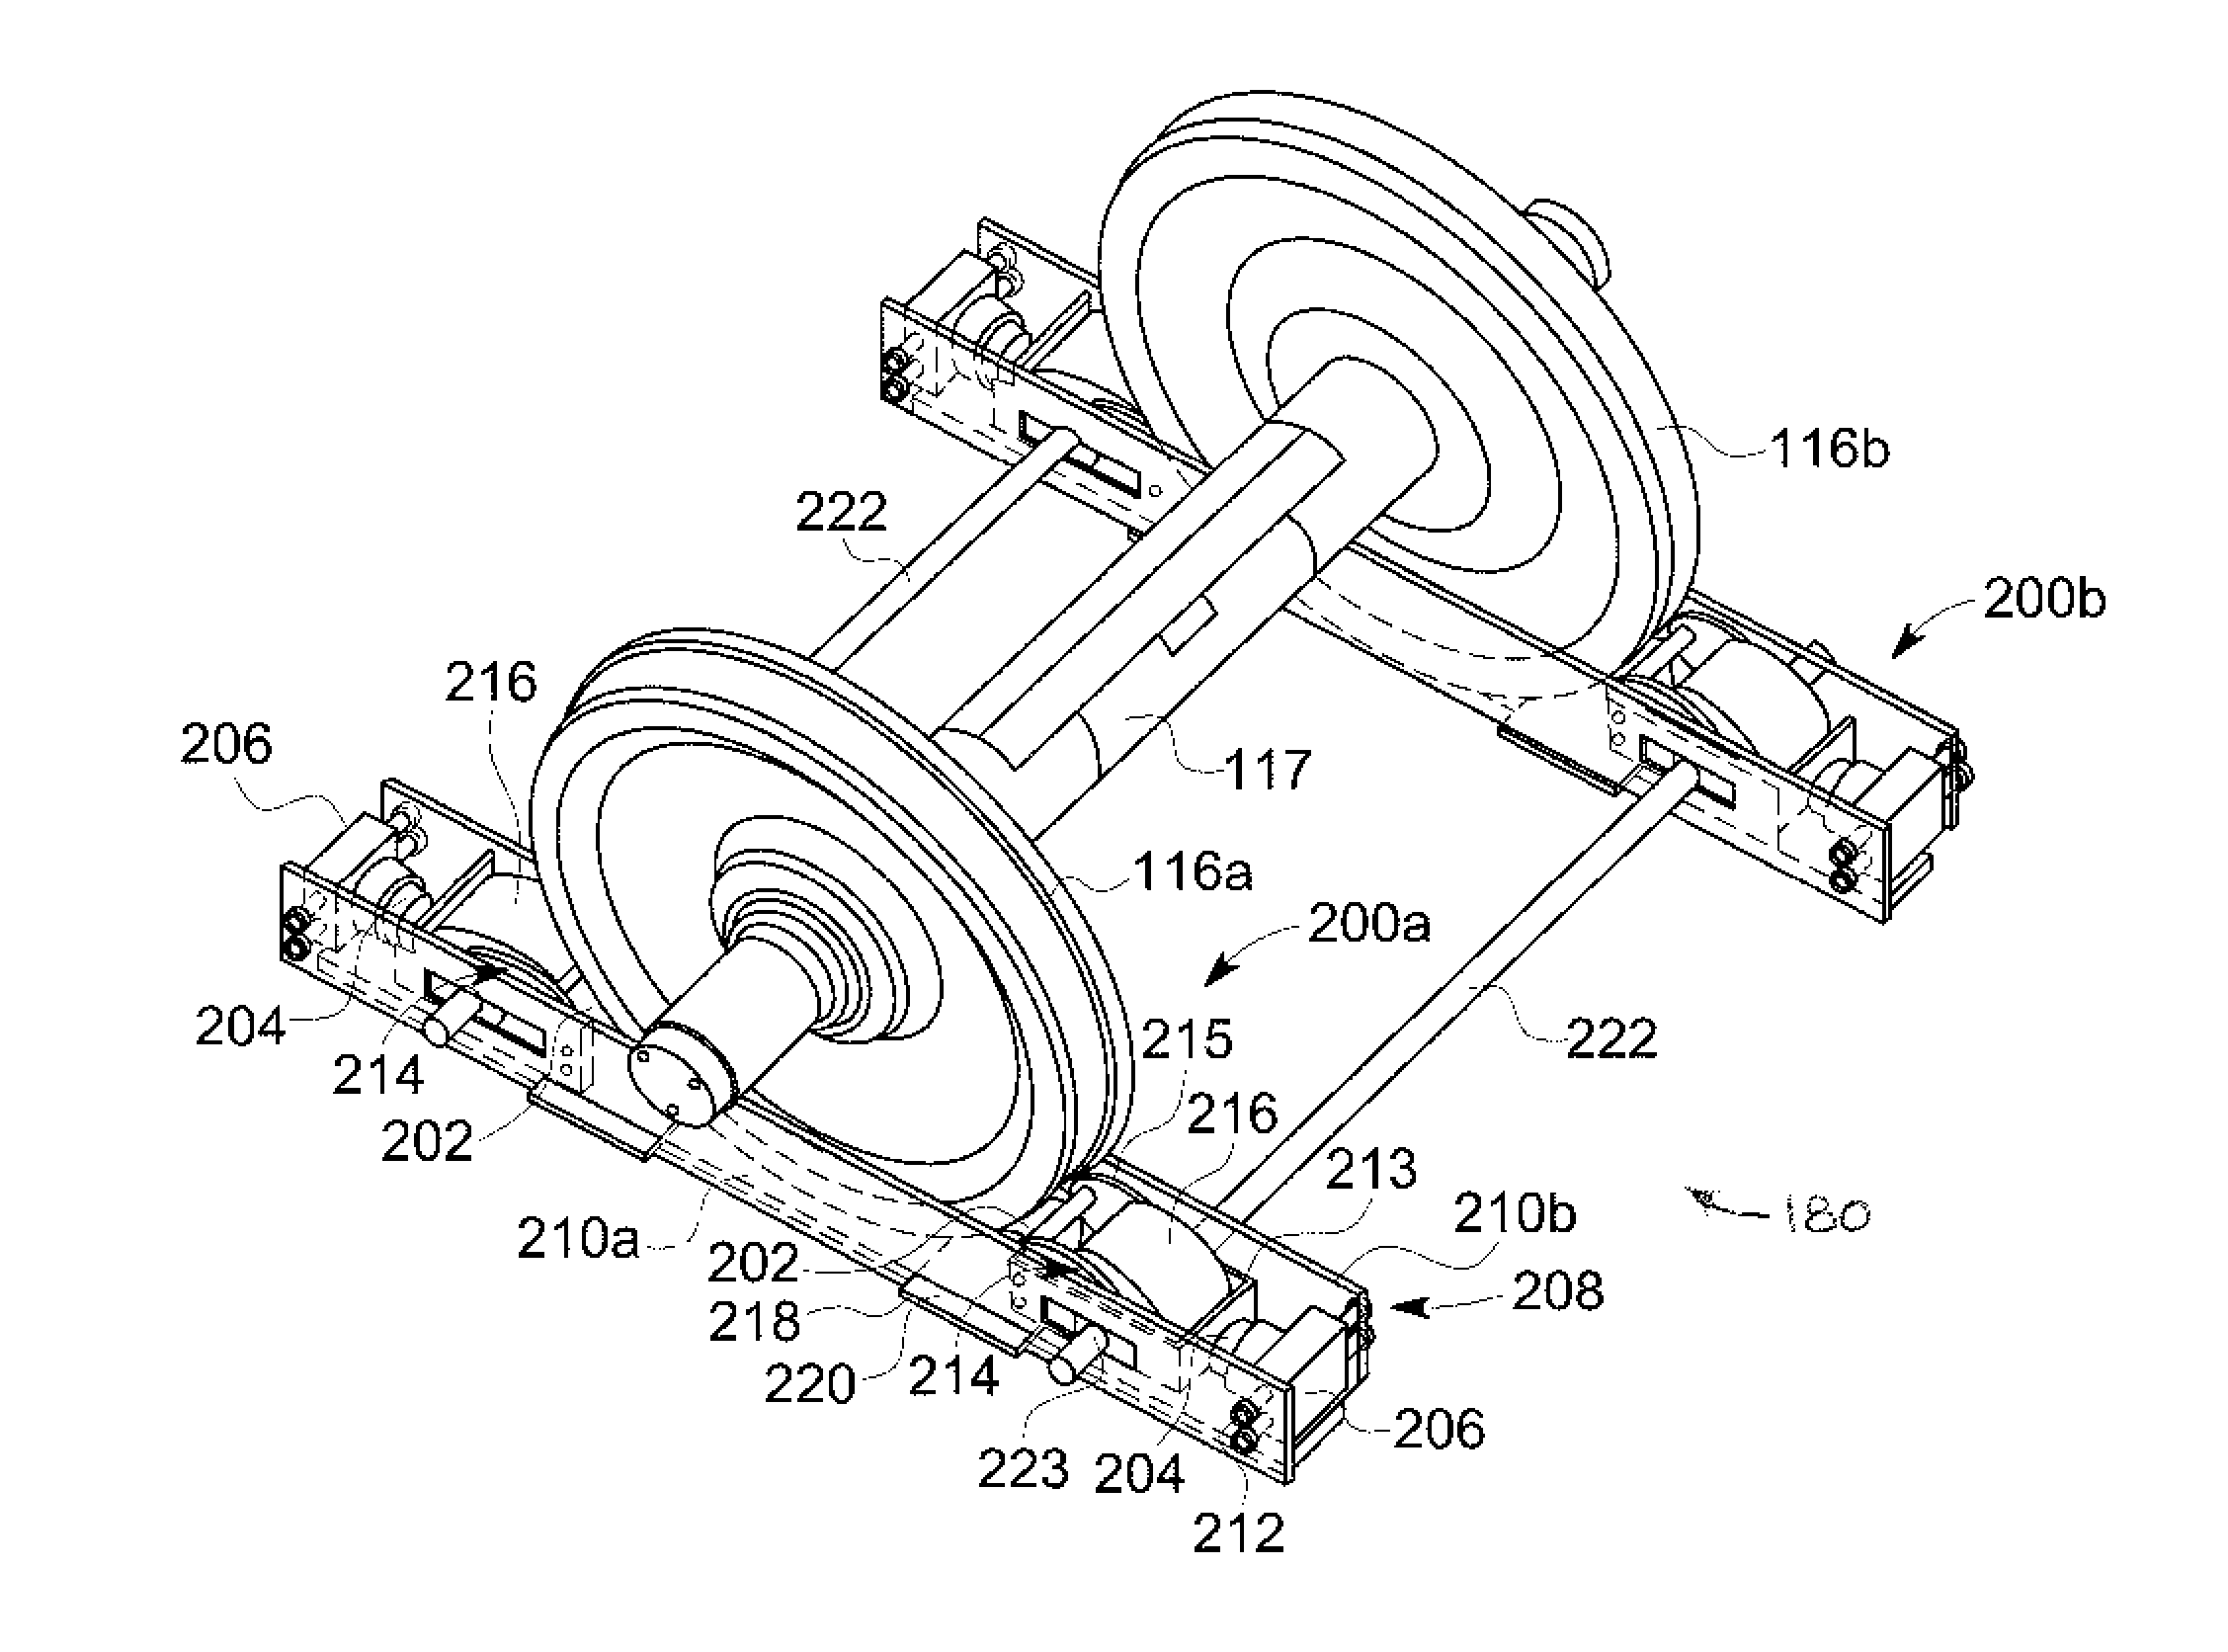 Apparatus and method for lifting and moving an axle of a rail vehicle